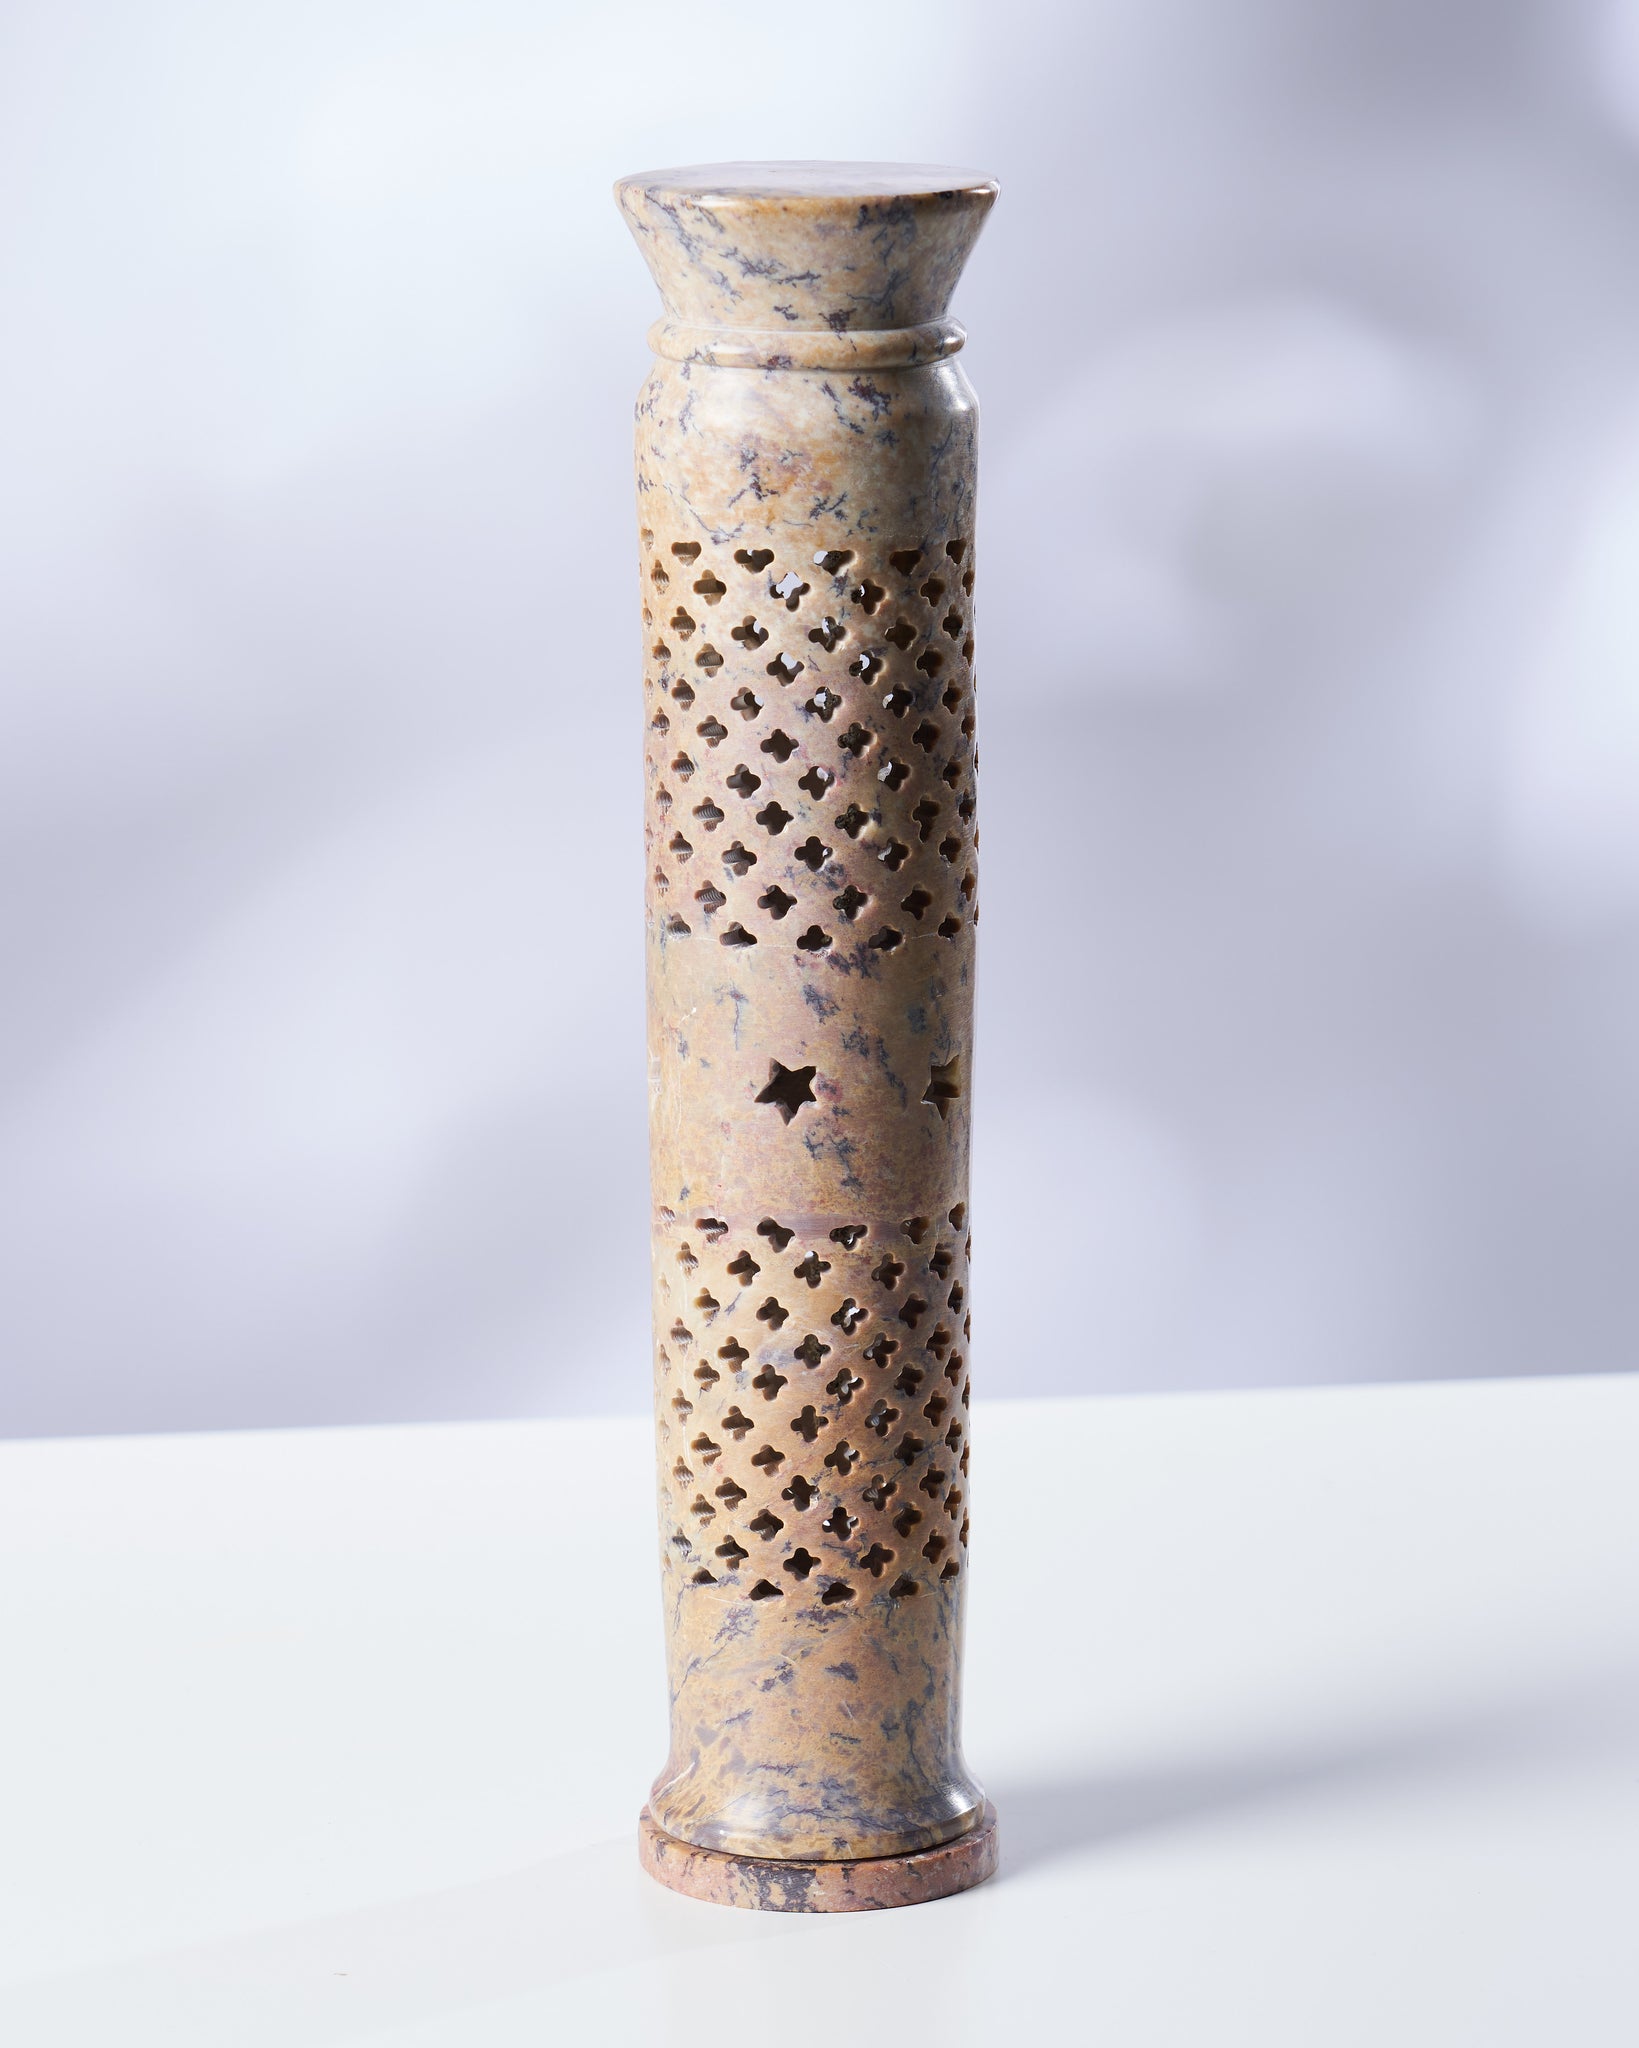 Hand-Carved Soapstone Incense Tower - Elevate Your Meditation and Sacred Rituals with this Unique Incense Burner Made from Precious Indian Soapstone